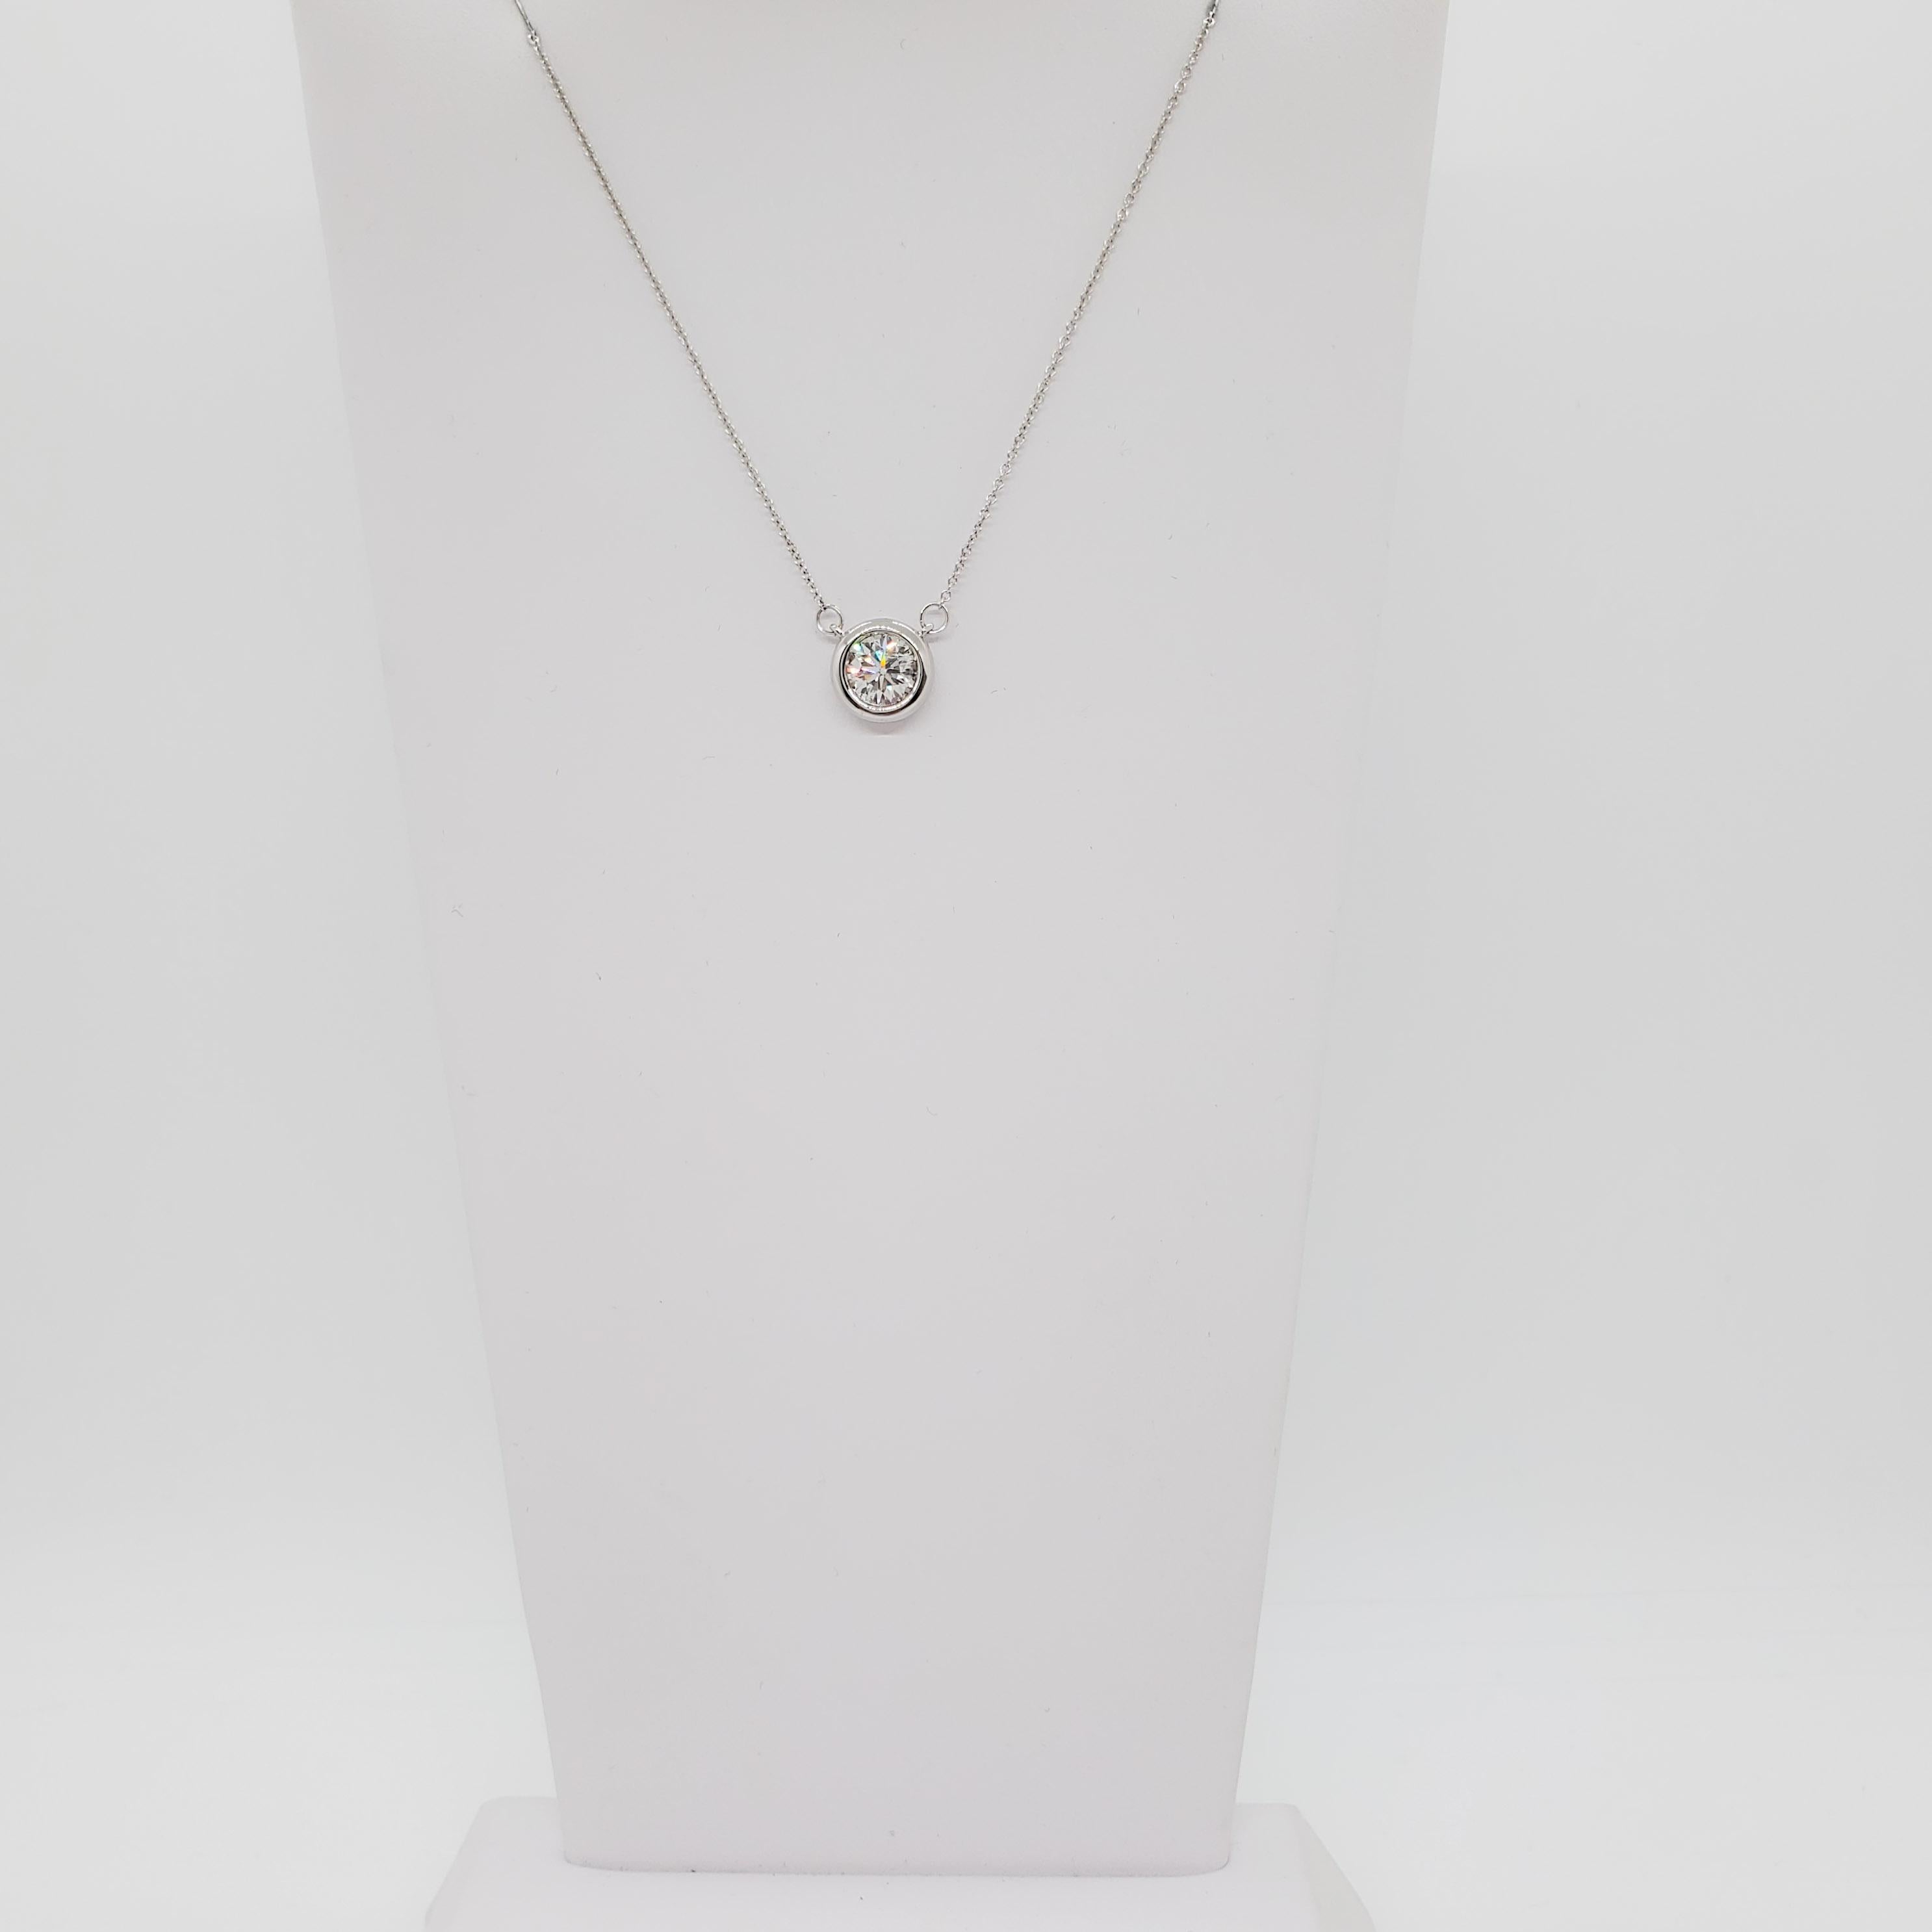 Beautiful and simple white diamond round in a bezel setting.  Diamond weighs 1.10 ct. and is a very nice quality.  Handmade 14k white gold mounting.  Chain length is 18